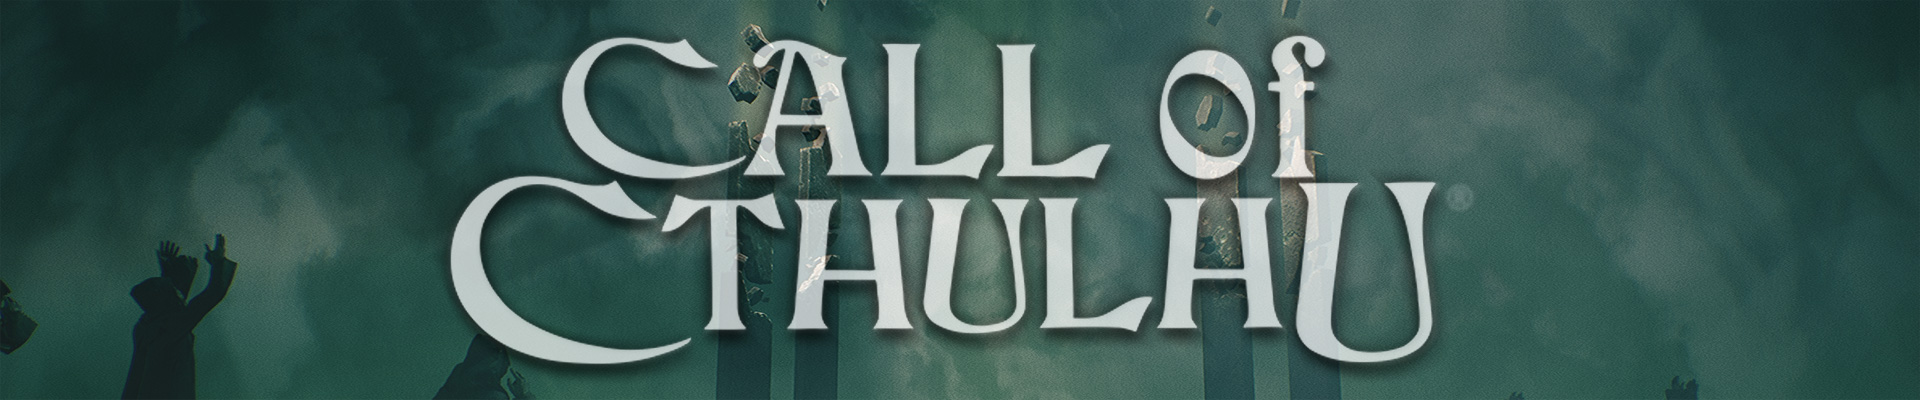 Disapprove: Call of Cthulhu